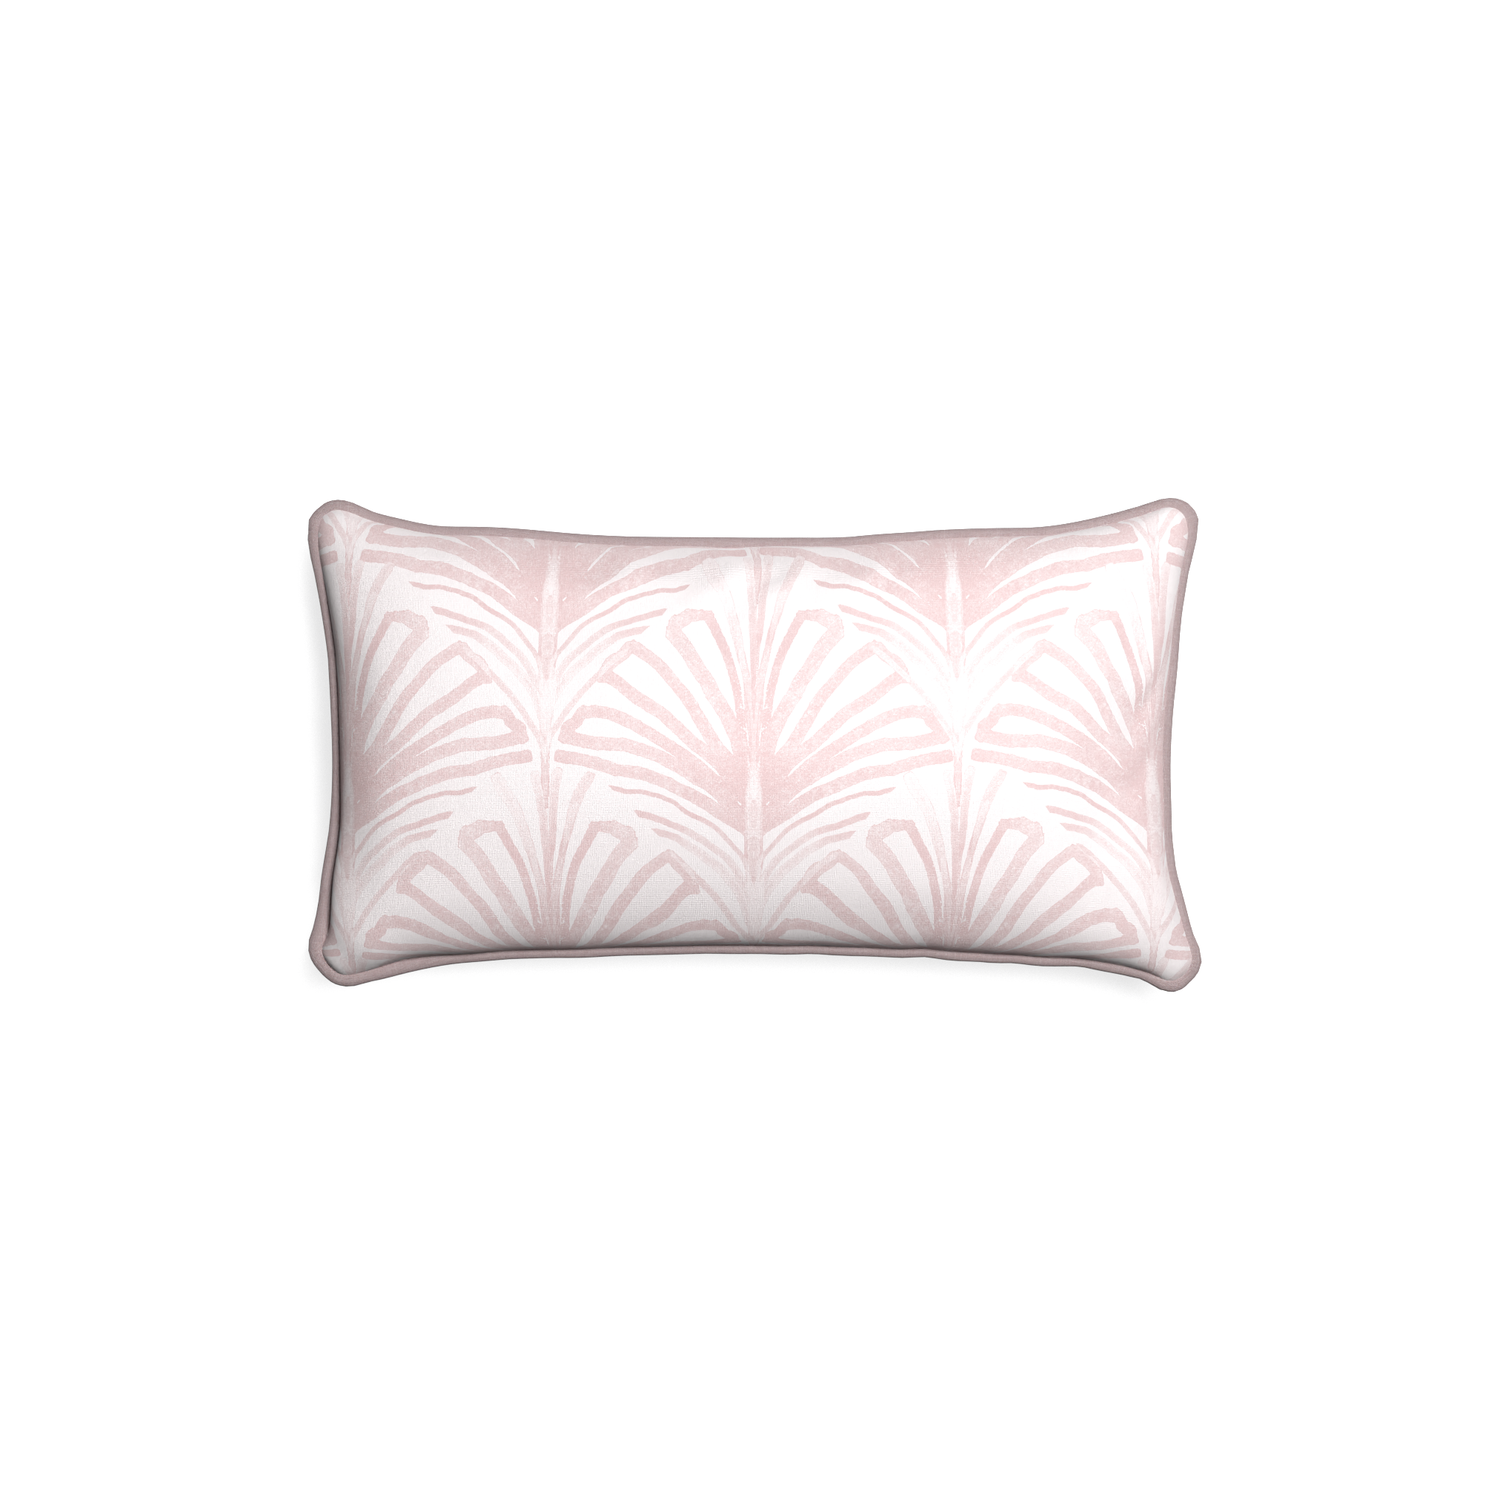 Petite-lumbar suzy rose custom rose pink palmpillow with orchid piping on white background